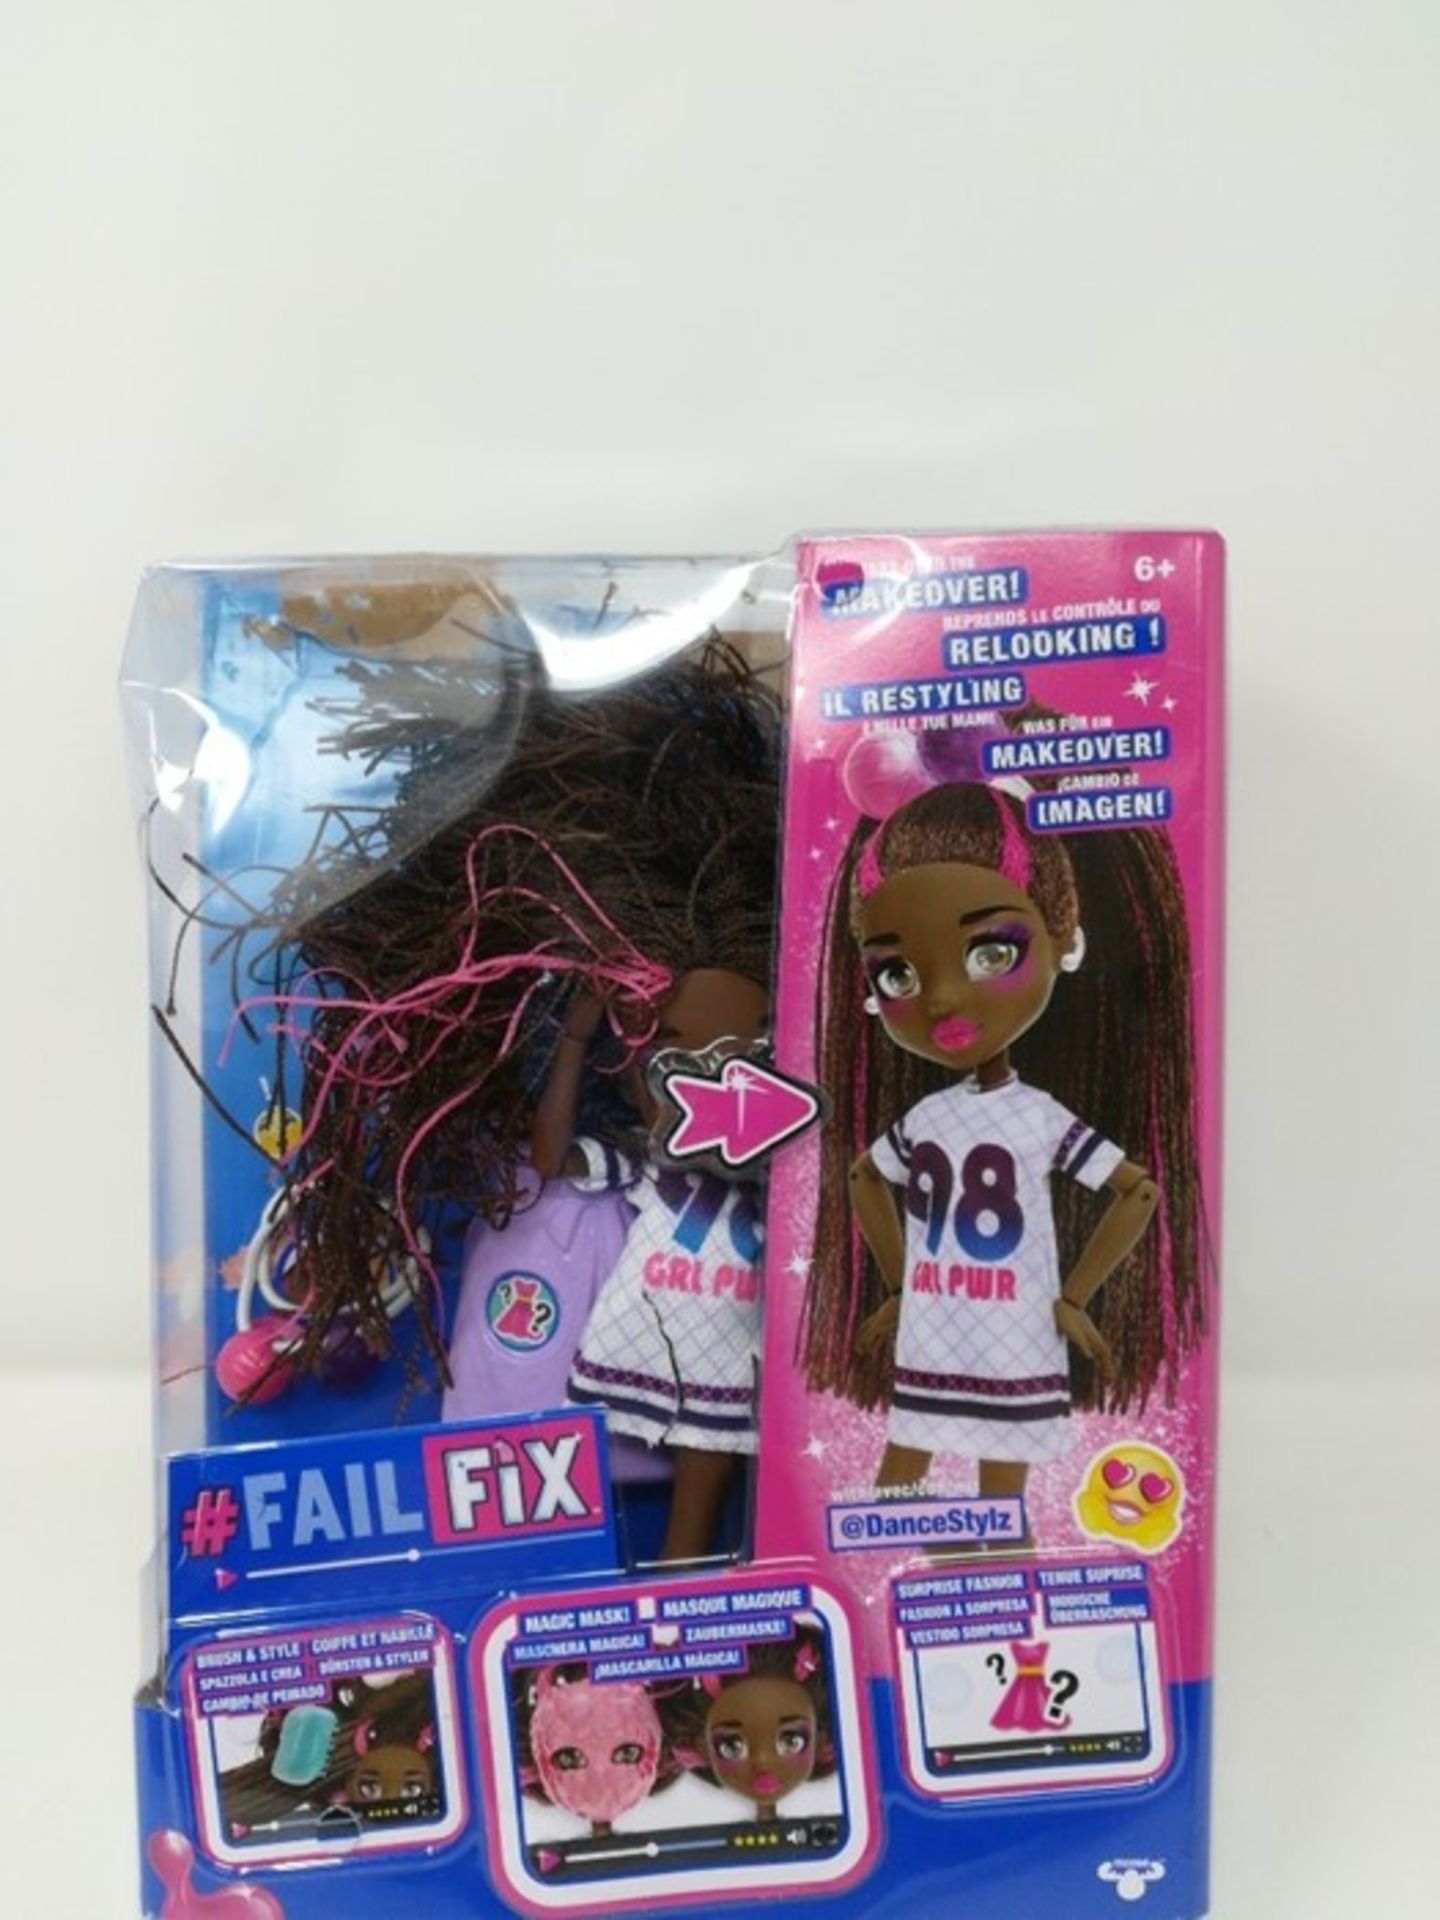 FailFix @Dance.Stylz Total Makeover Doll Pack, 8 - Image 2 of 2